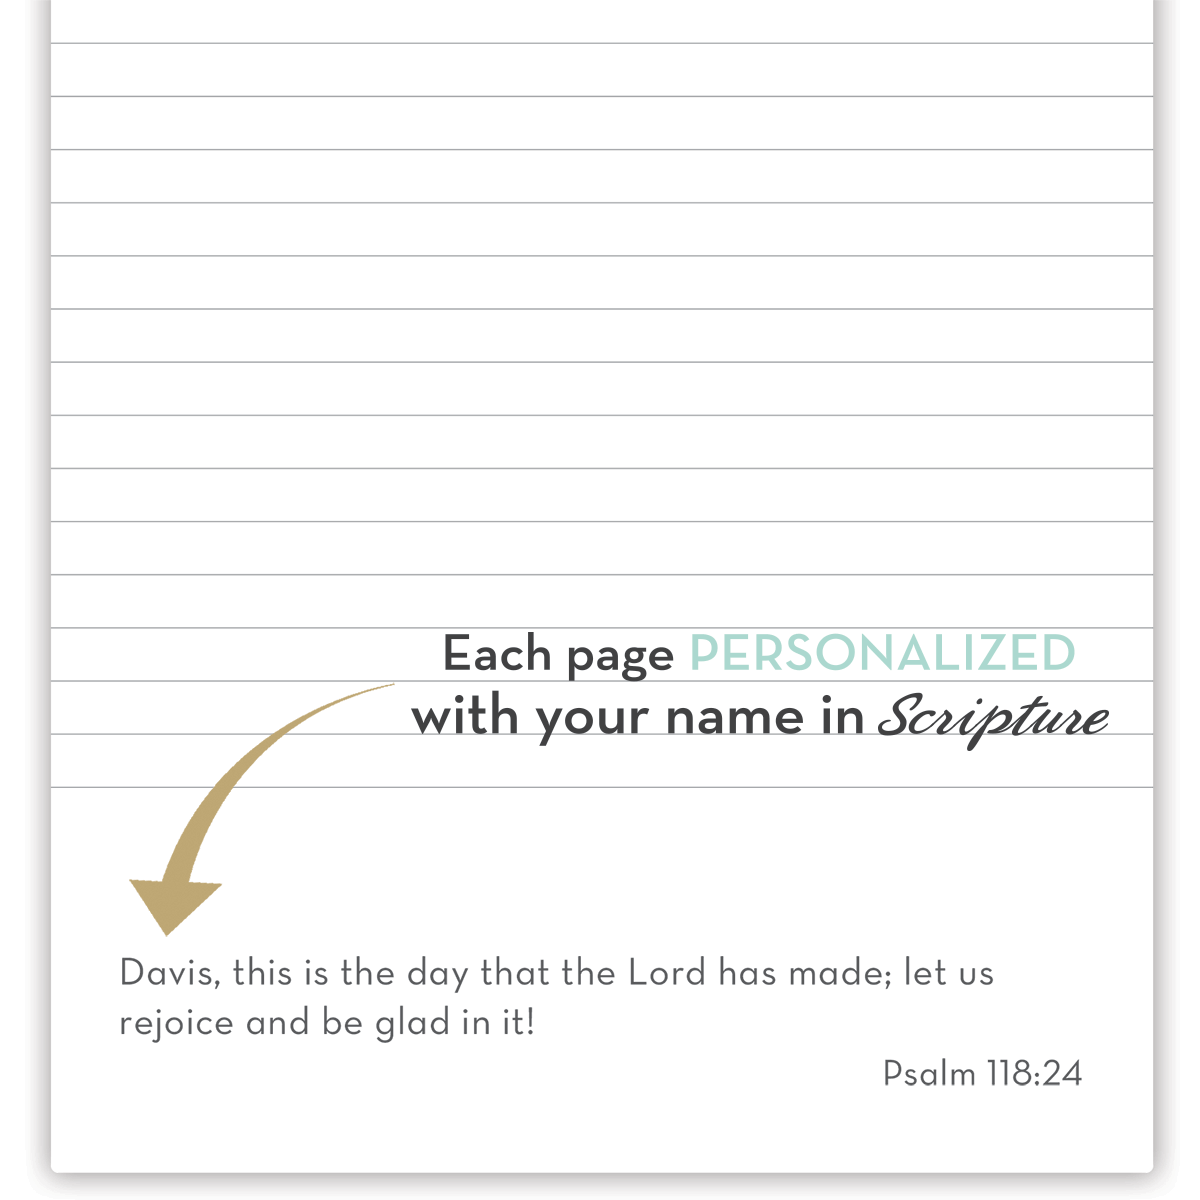 Personalized Scripture, Christian Gifts, Daily Devotional, Christian Journal, Bible Verse Journal, Prayer journal, Bible Journaling, Baptism Gifts, Christian graduation gifts, Christian Planner, personalized Christian Gifts, Devotional, Scripture journal, Scripture planner, Morning Prayers, Prayers, Personalized Bible